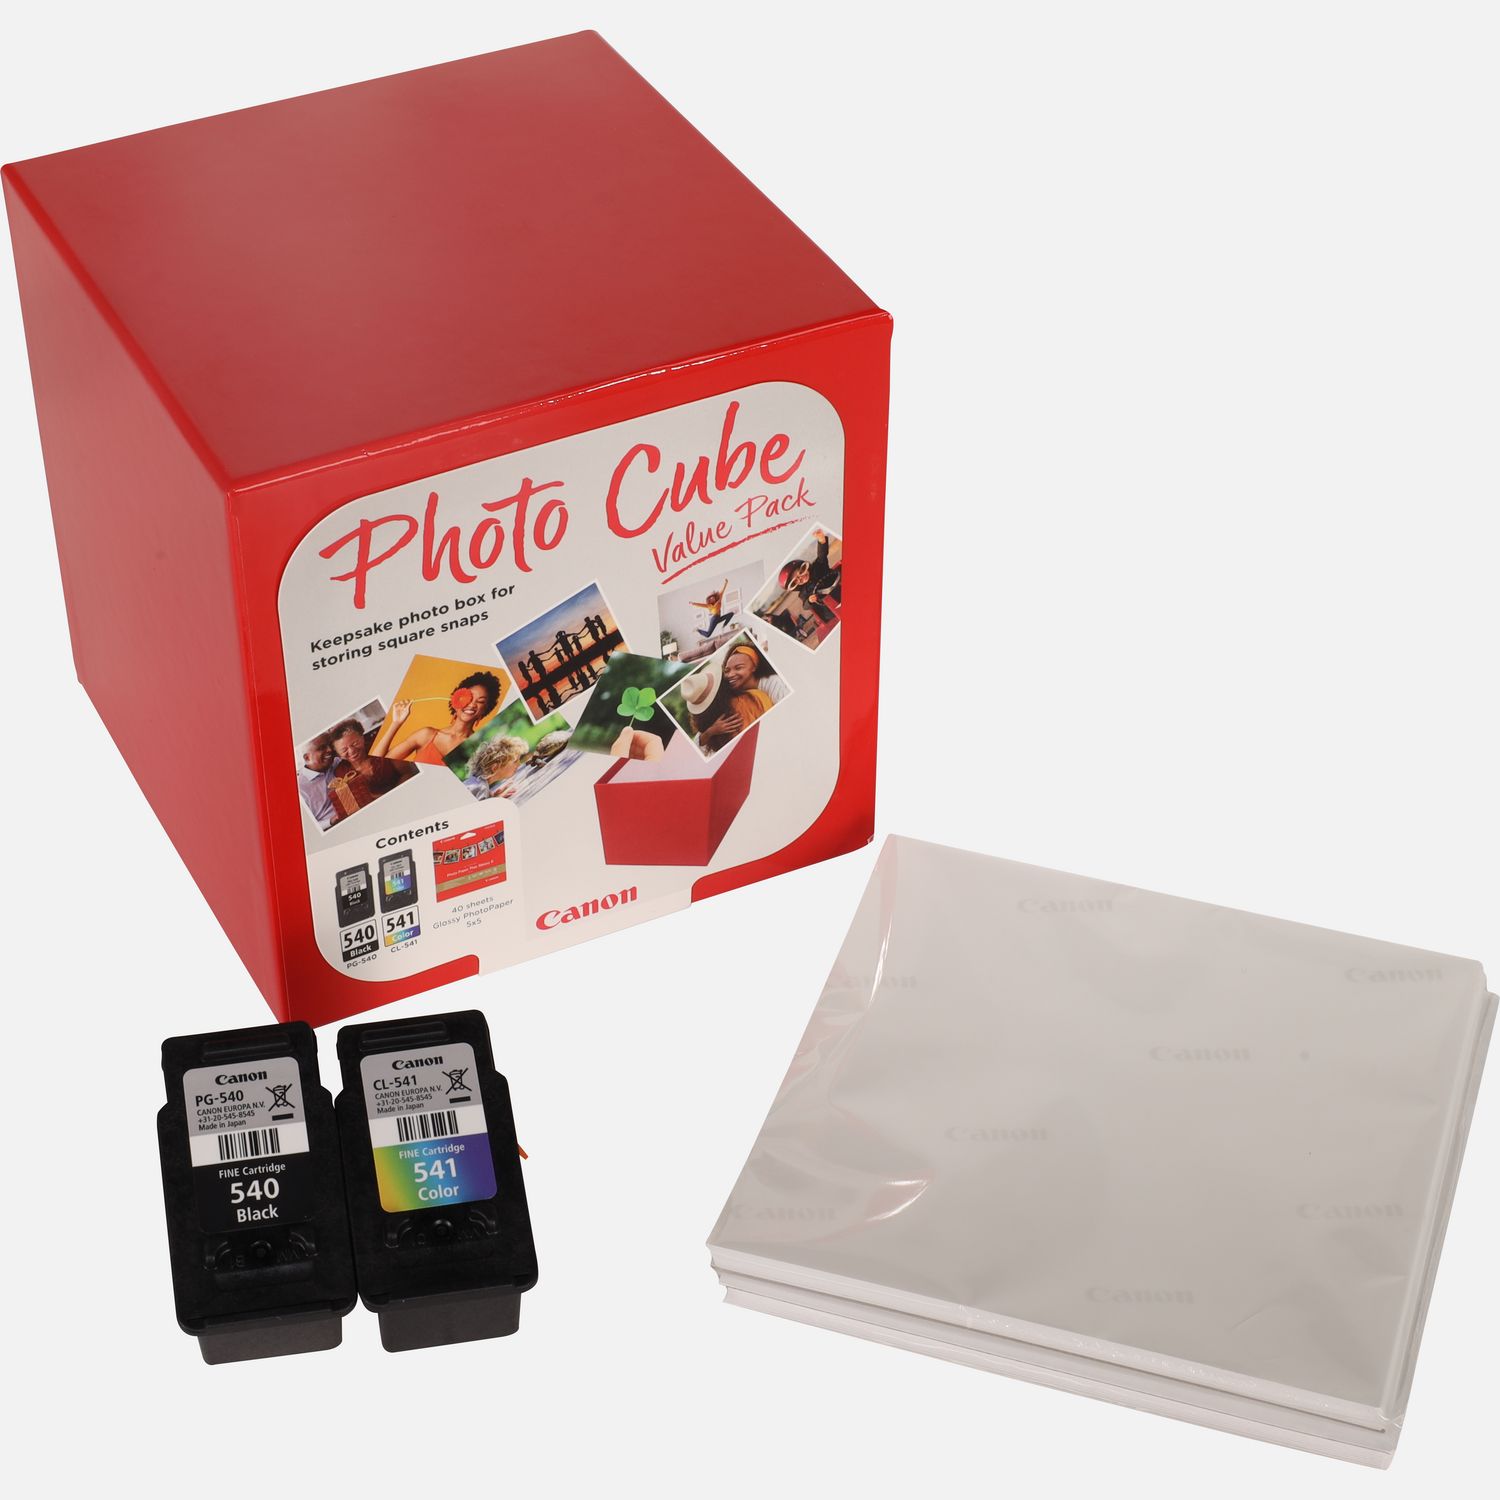 https://i1.adis.ws/i/canon/5225B012_PHOTO-CUBE_PG-540-CL-541_01/canon-photo-cube-with-pg-540-cl-541-ink-cartridges-pp-201-5-x-5-photo-paper-plus-glossy-ii-40-sheets-value-pack-product-front-view?w=1500&bg=gray95